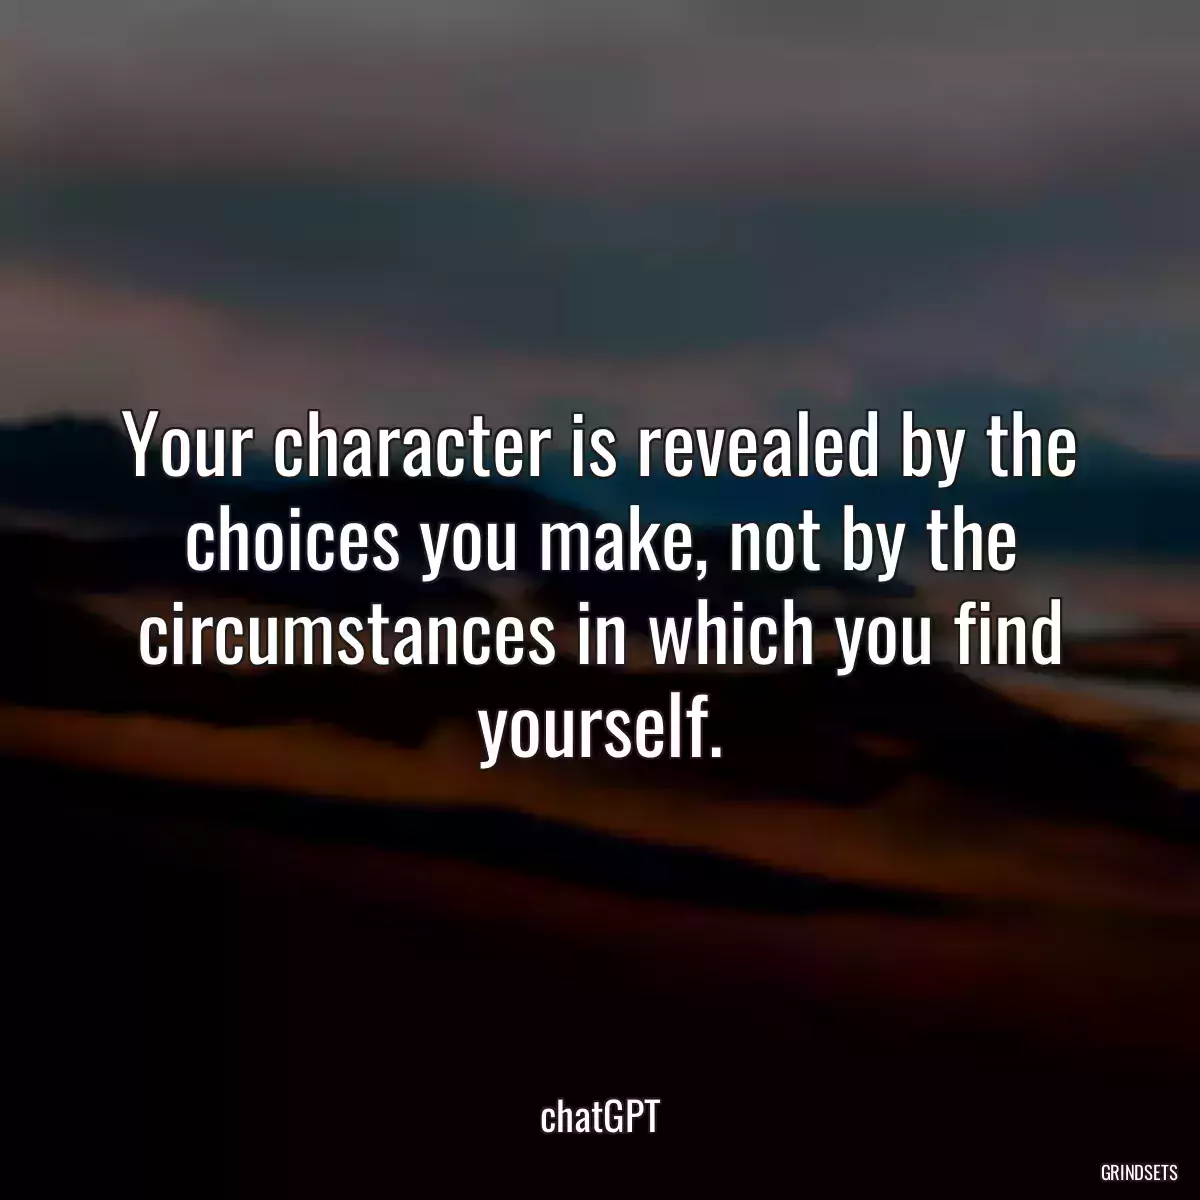 Your character is revealed by the choices you make, not by the circumstances in which you find yourself.